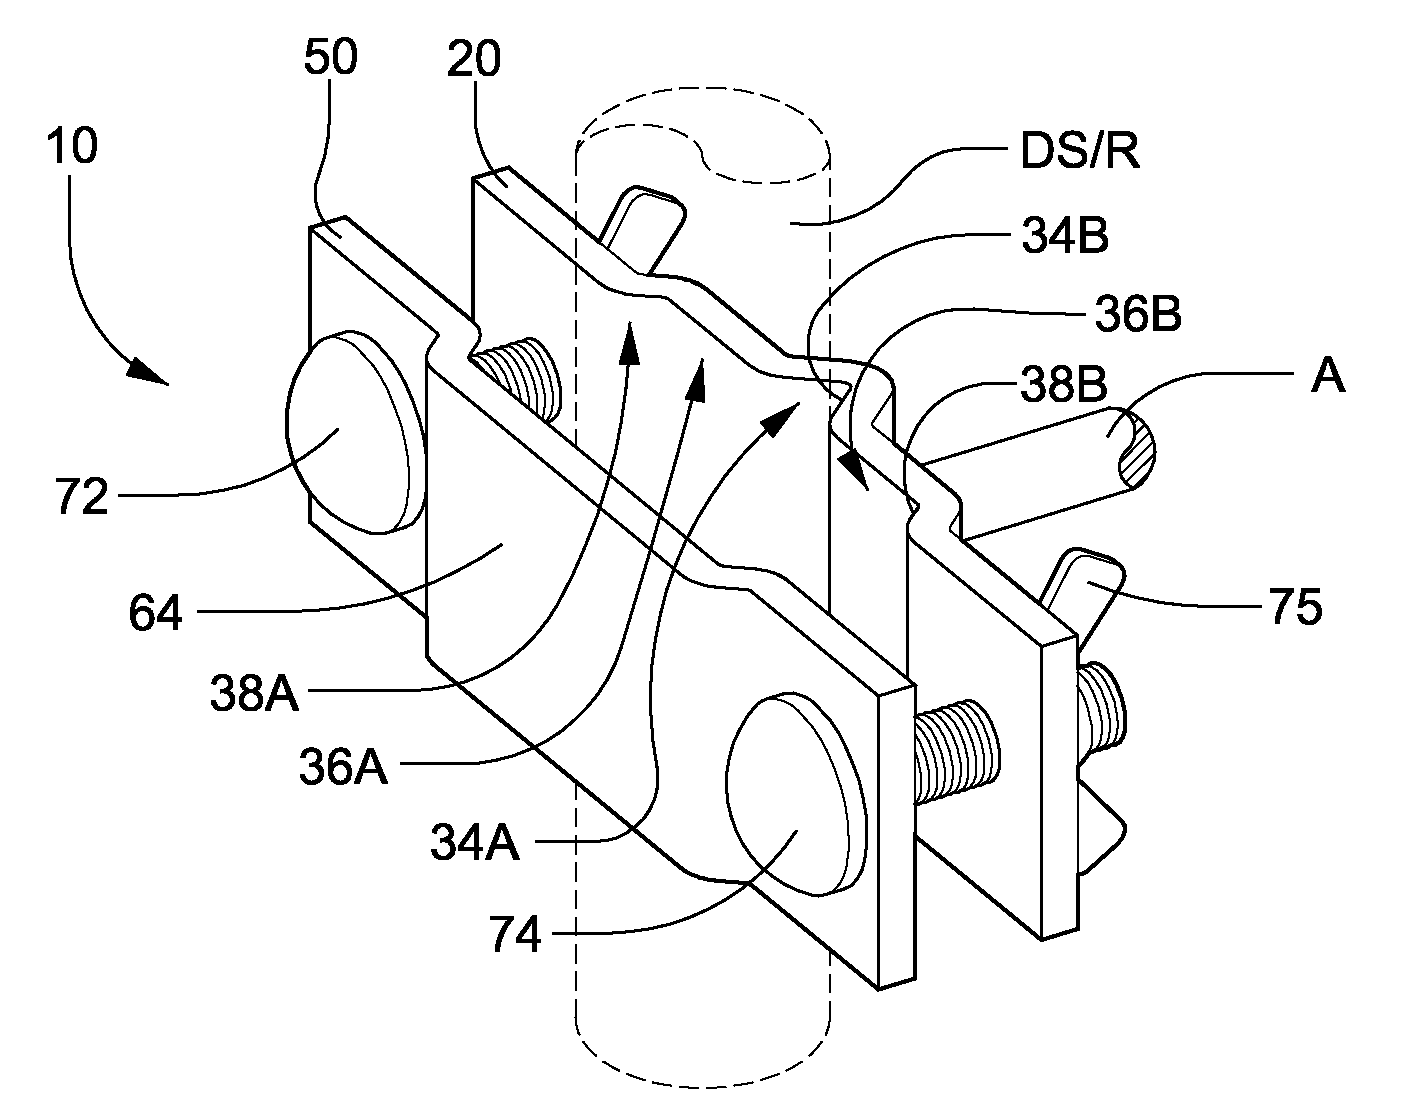 Universal clamp assembly